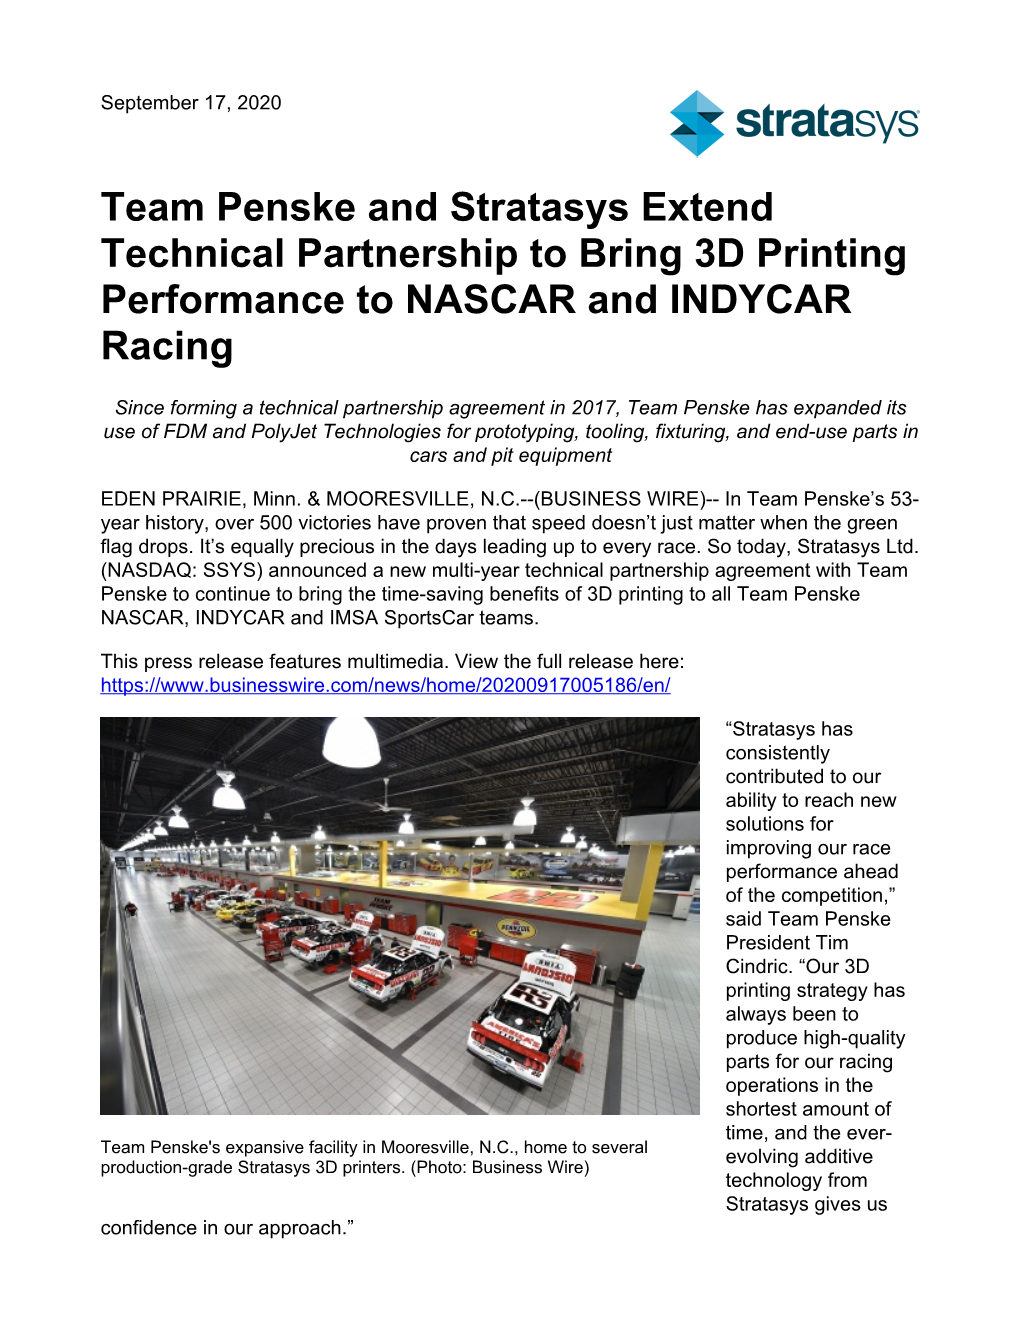 Team Penske and Stratasys Extend Technical Partnership to Bring 3D Printing Performance to NASCAR and INDYCAR Racing